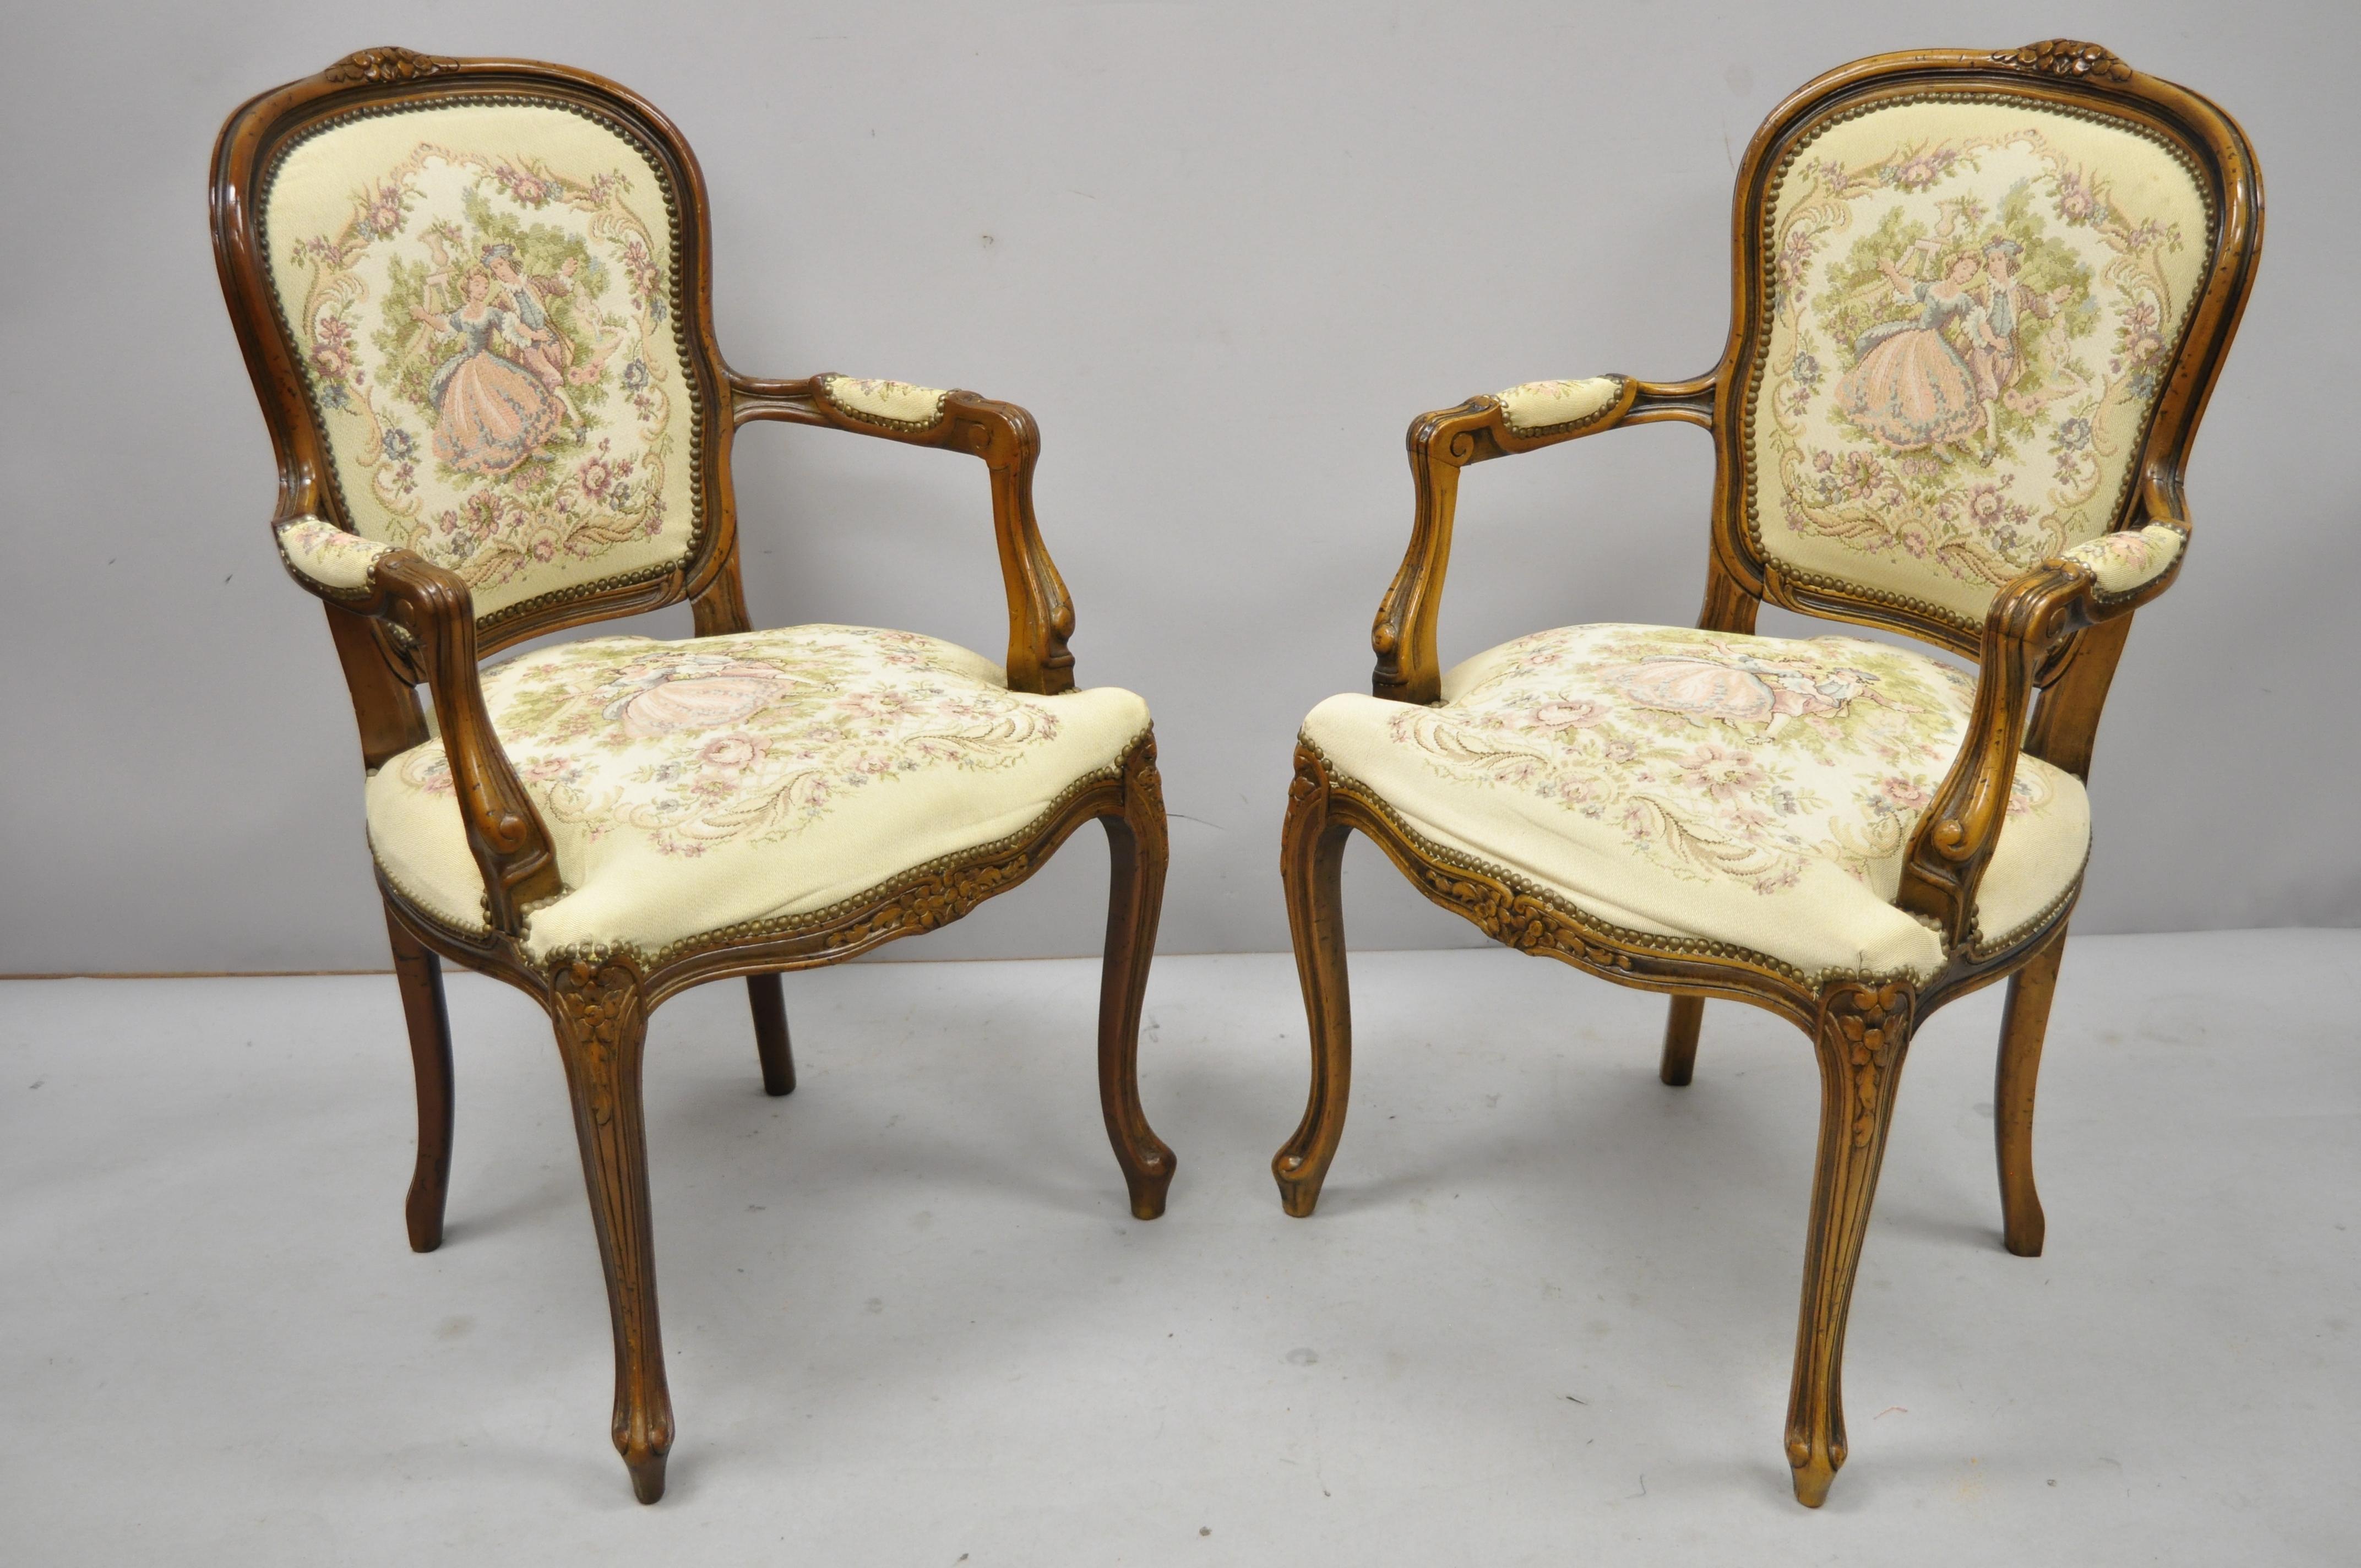 Pair of Italian Chateau d'Ax Spa French Louis XV style Tapestry armchairs.
Listing includes solid wood frame, beautiful wood grain, distressed finish, cabriole legs, quality Italian craftsmanship, great style and form, circa late 20th century.